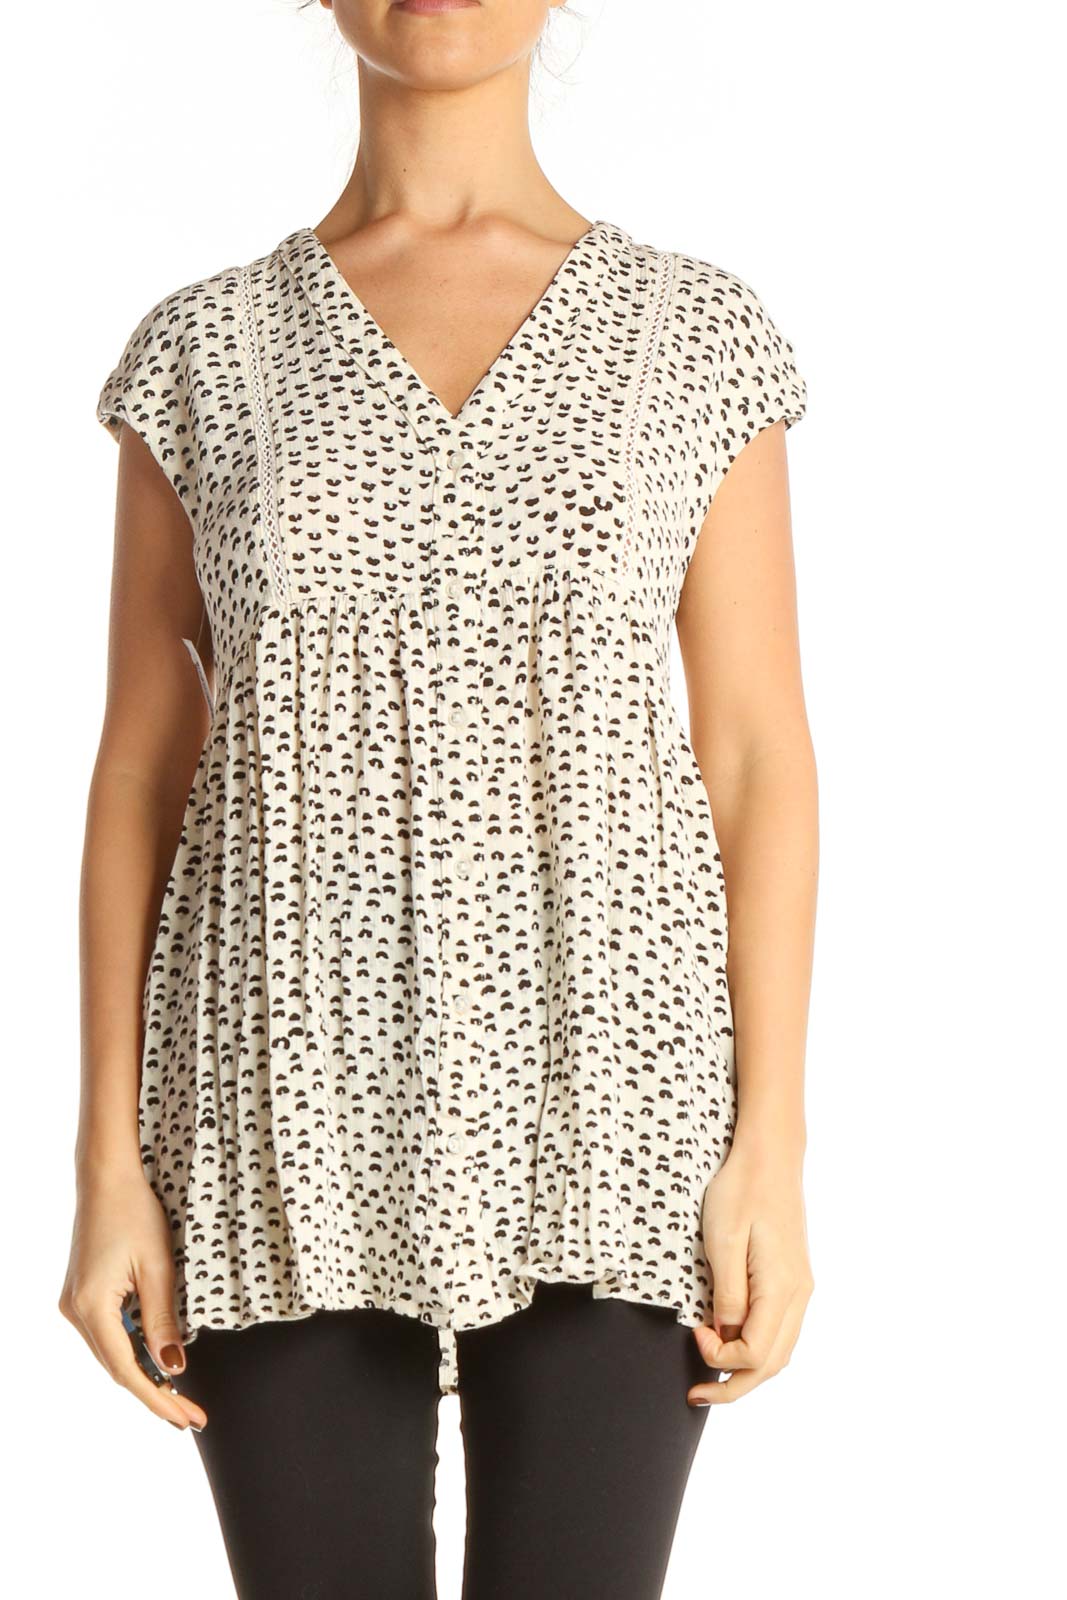 Beige Printed Blouse Front